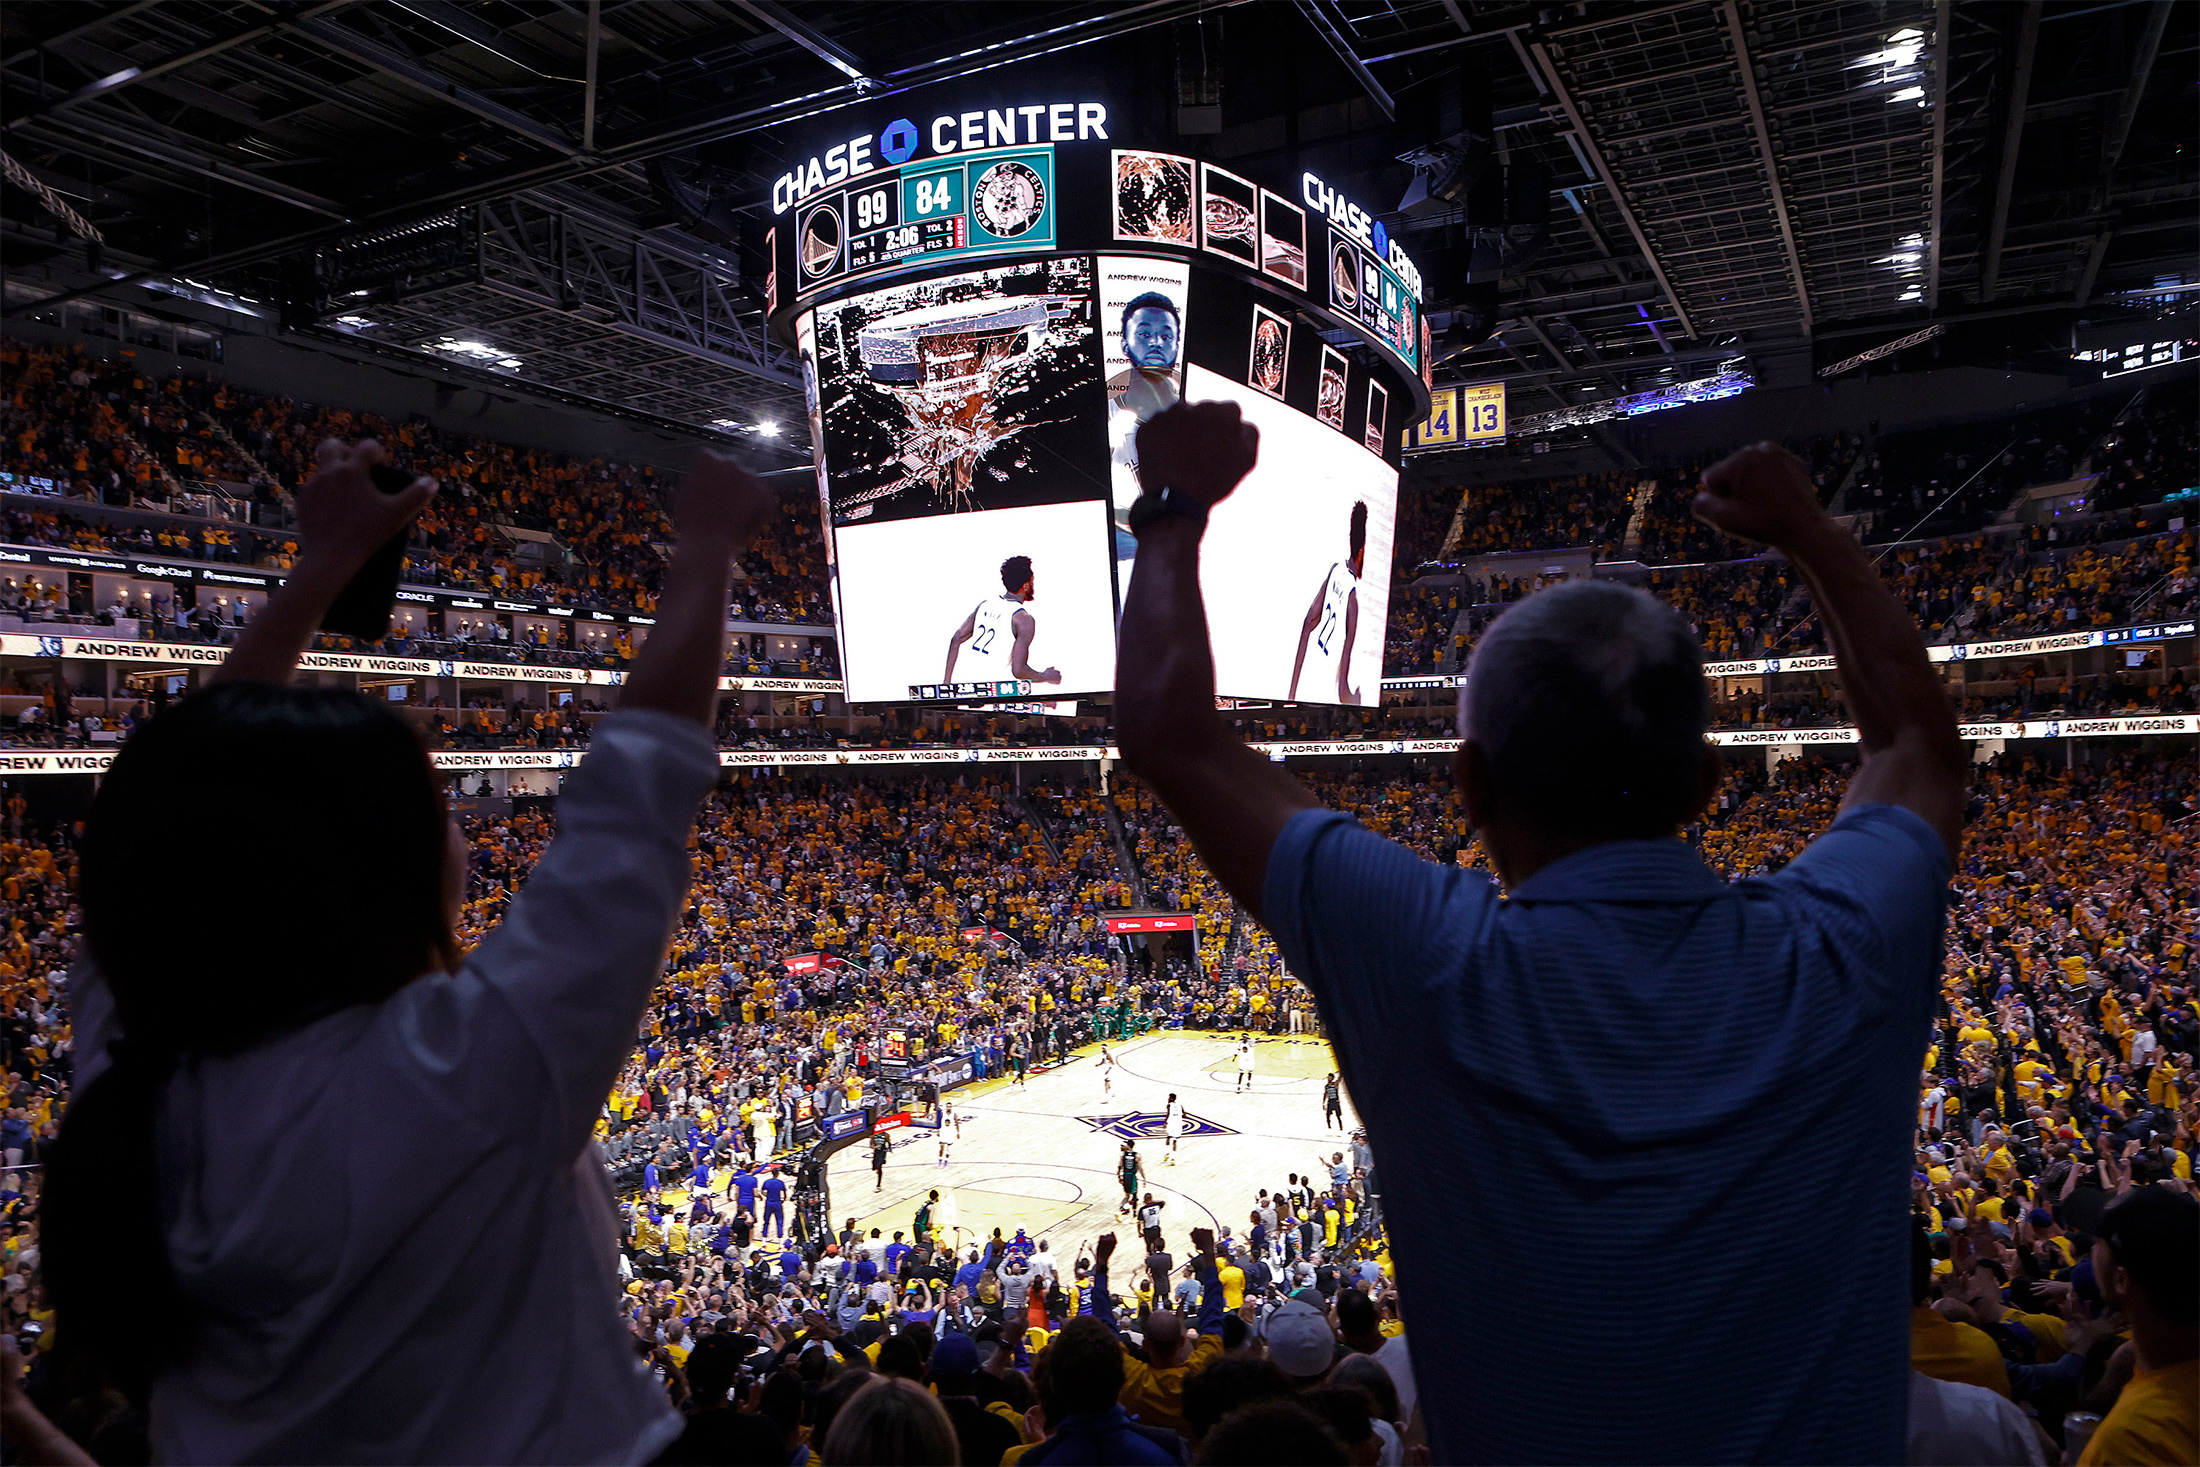 NBA All-Star Weekend 2025 Host Is Golden State Warriors in San Francisco -  Bloomberg